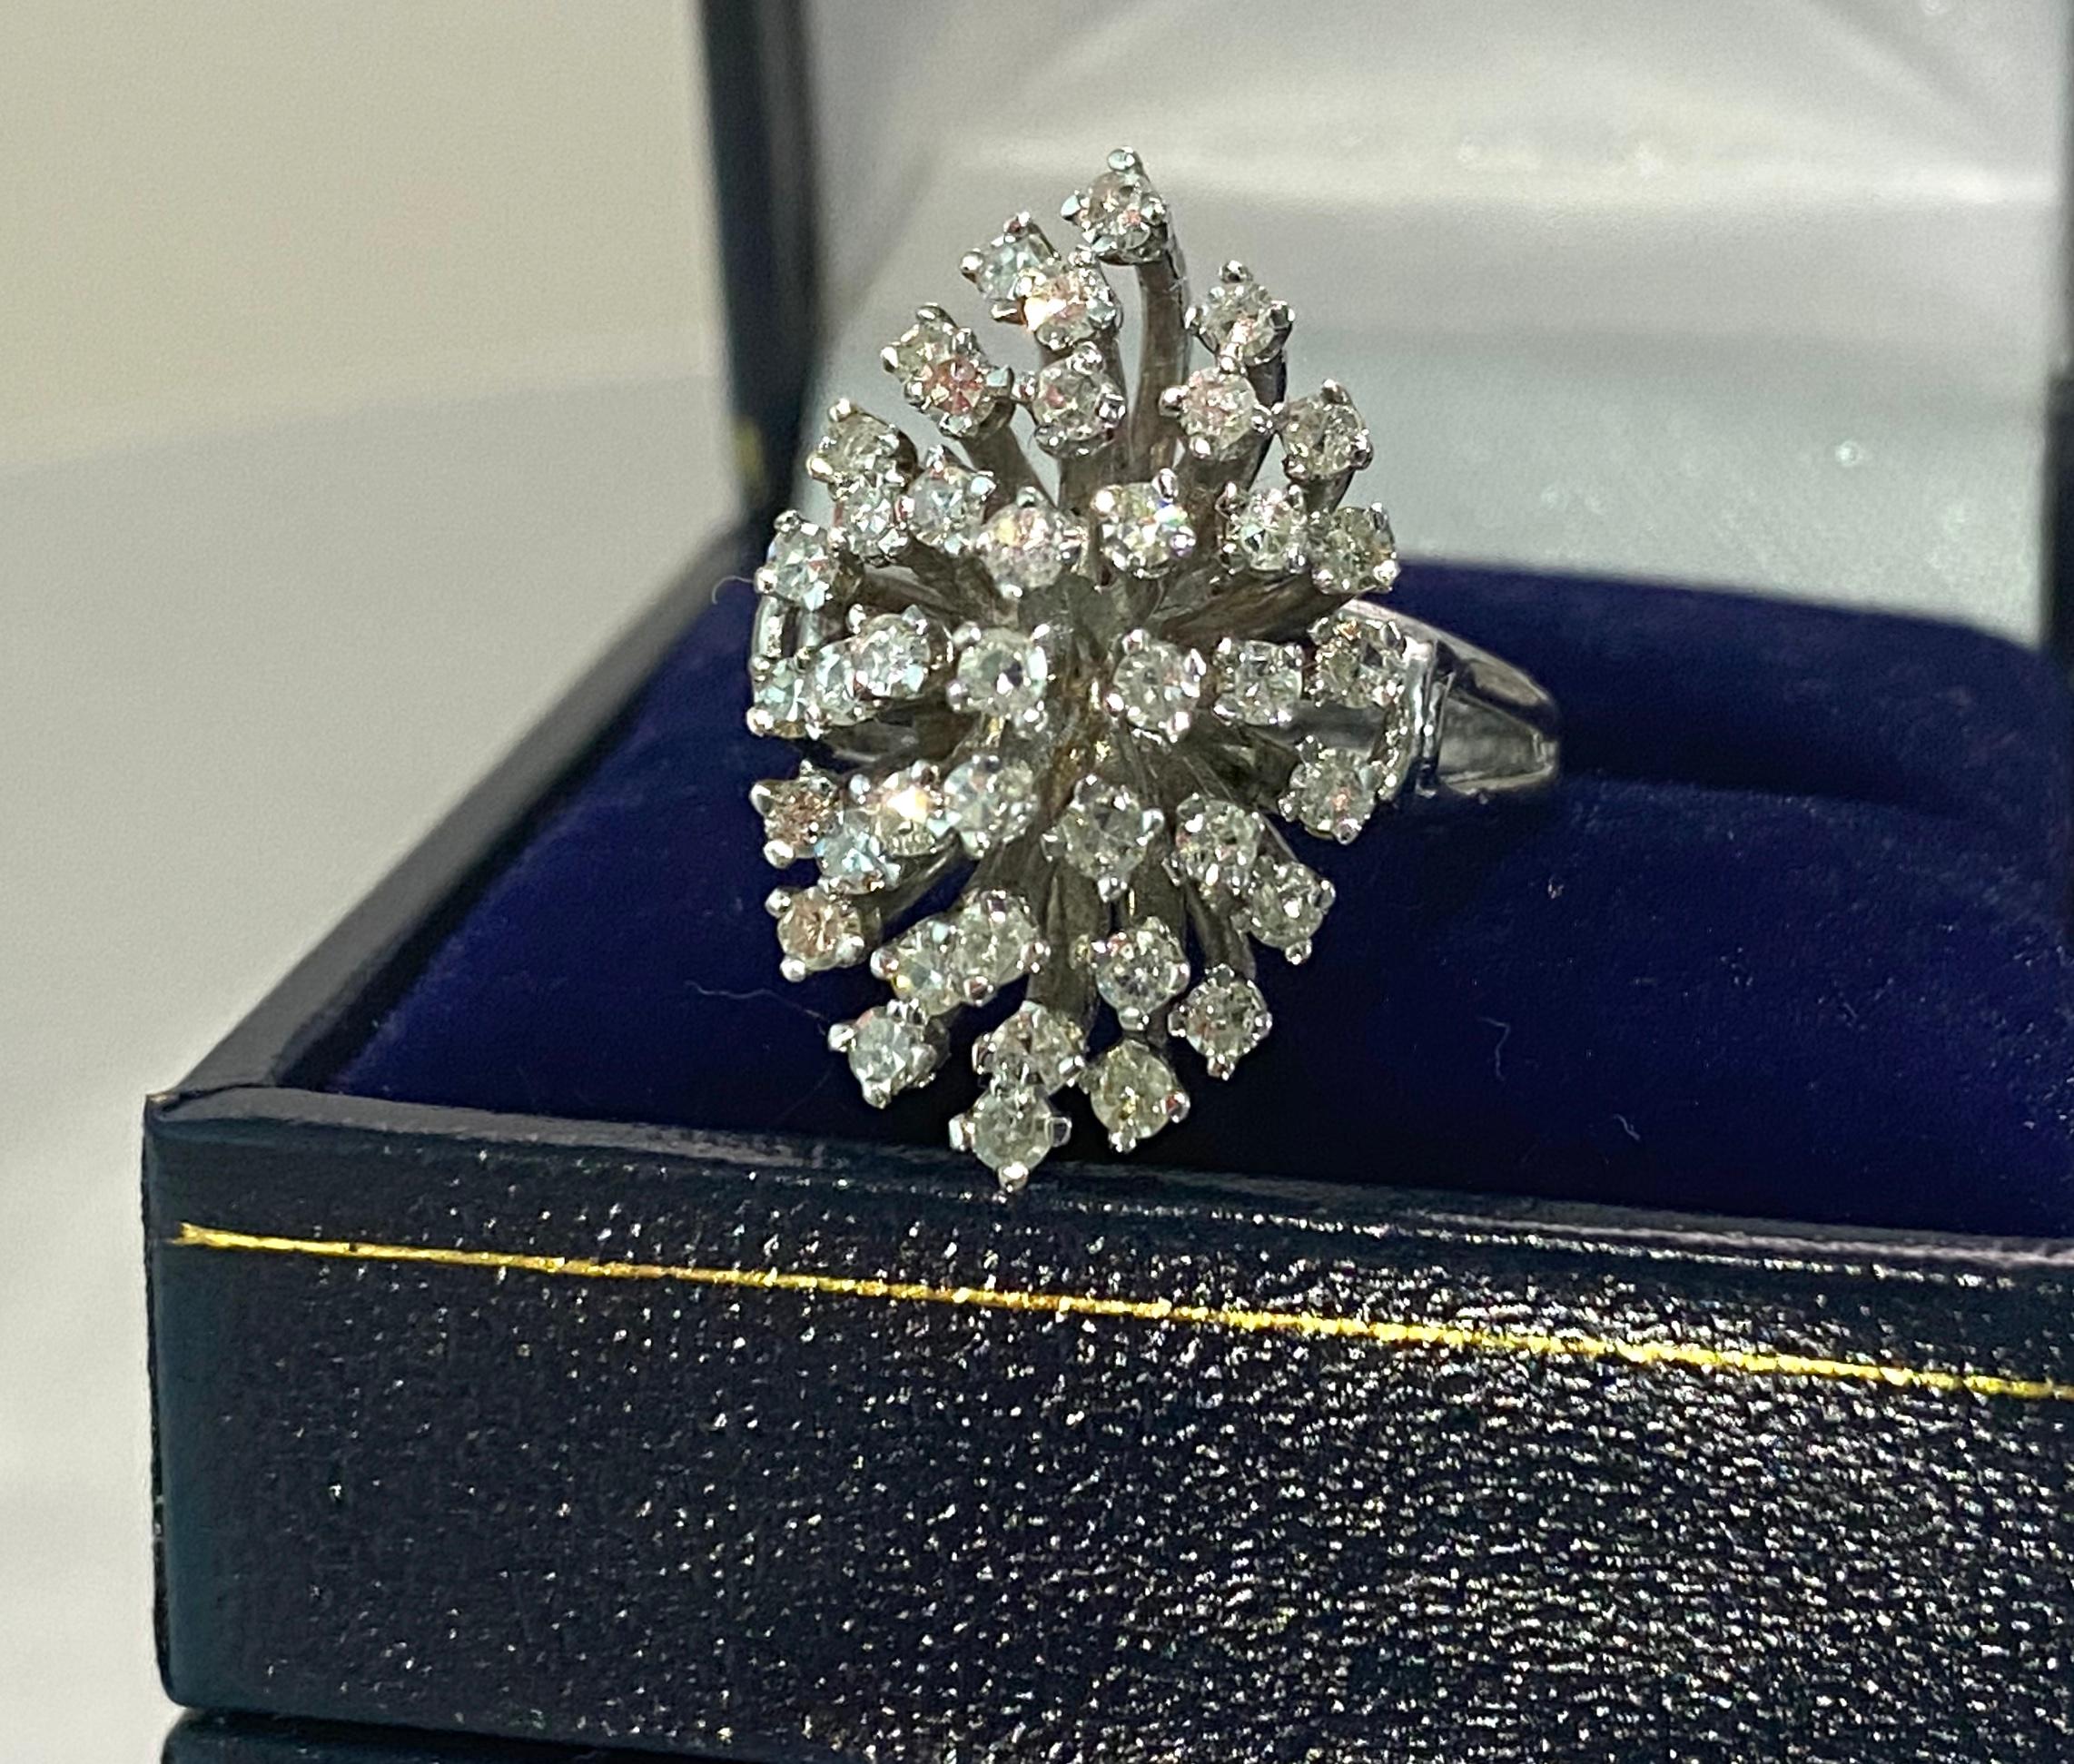 Metal: 14k white gold. 

Diamonds: 1.80 CWT. VS clarity and F color. Round cut diamonds. 

Gorgeous 100% natural earth mined Diamonds. 

Contemporary engagement ring. 

Ring size: US 6.25 
Free ring resizing available. 